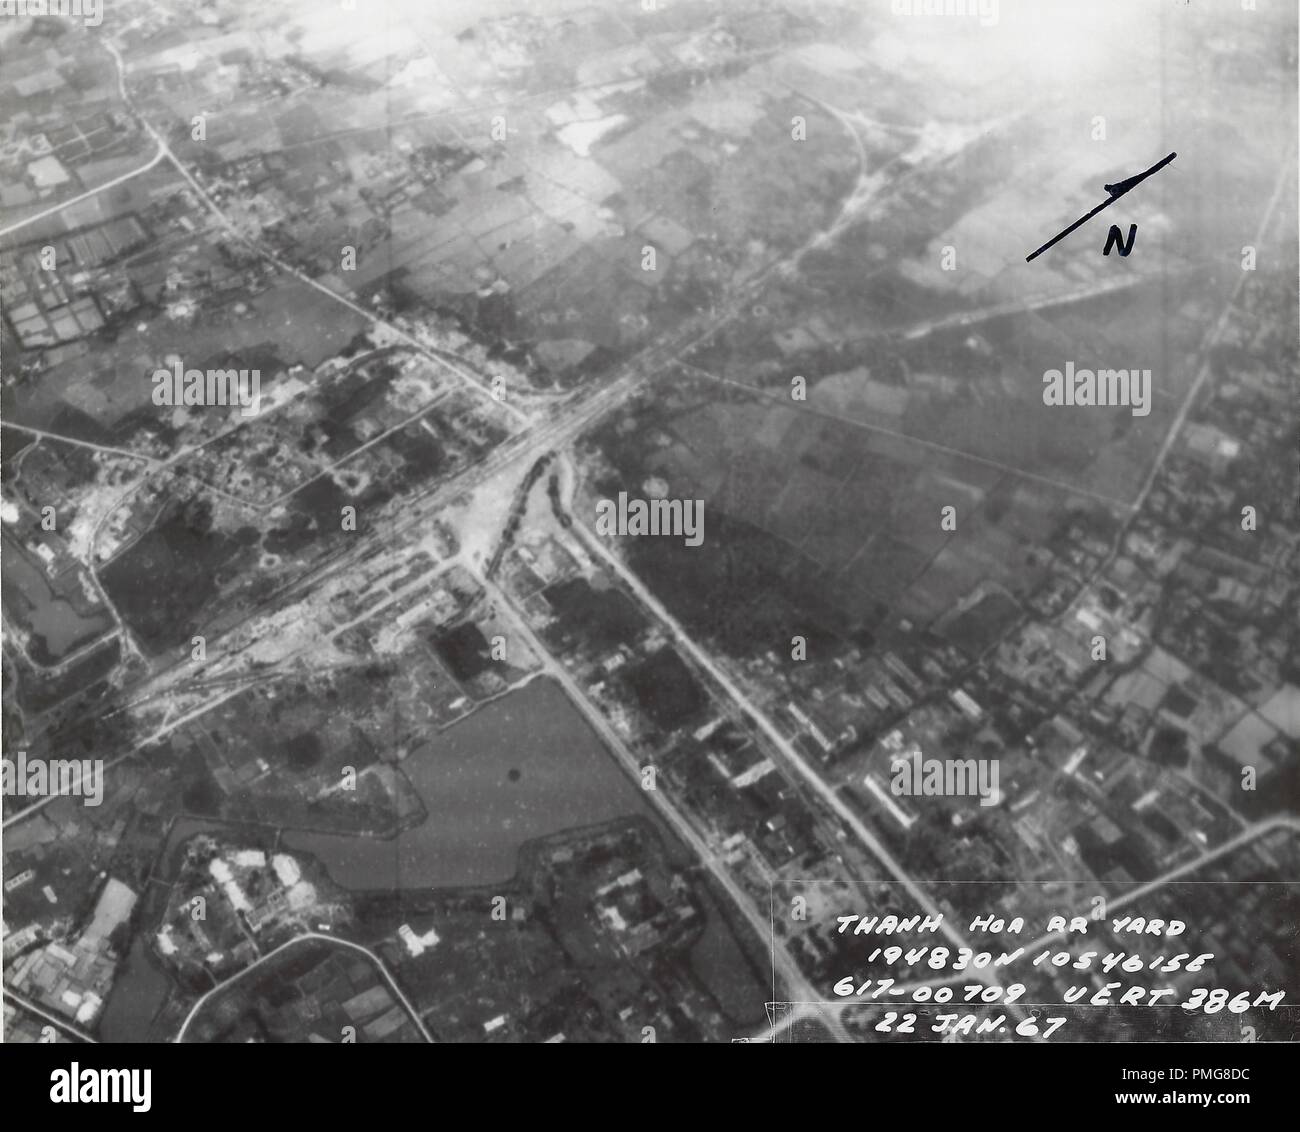 Black and white aerial photograph showing a railroad and rail yard in Thang Hoa, a populated region of northern Vietnam, photographed during the Vietnam War, January 22, 1967. () Stock Photo